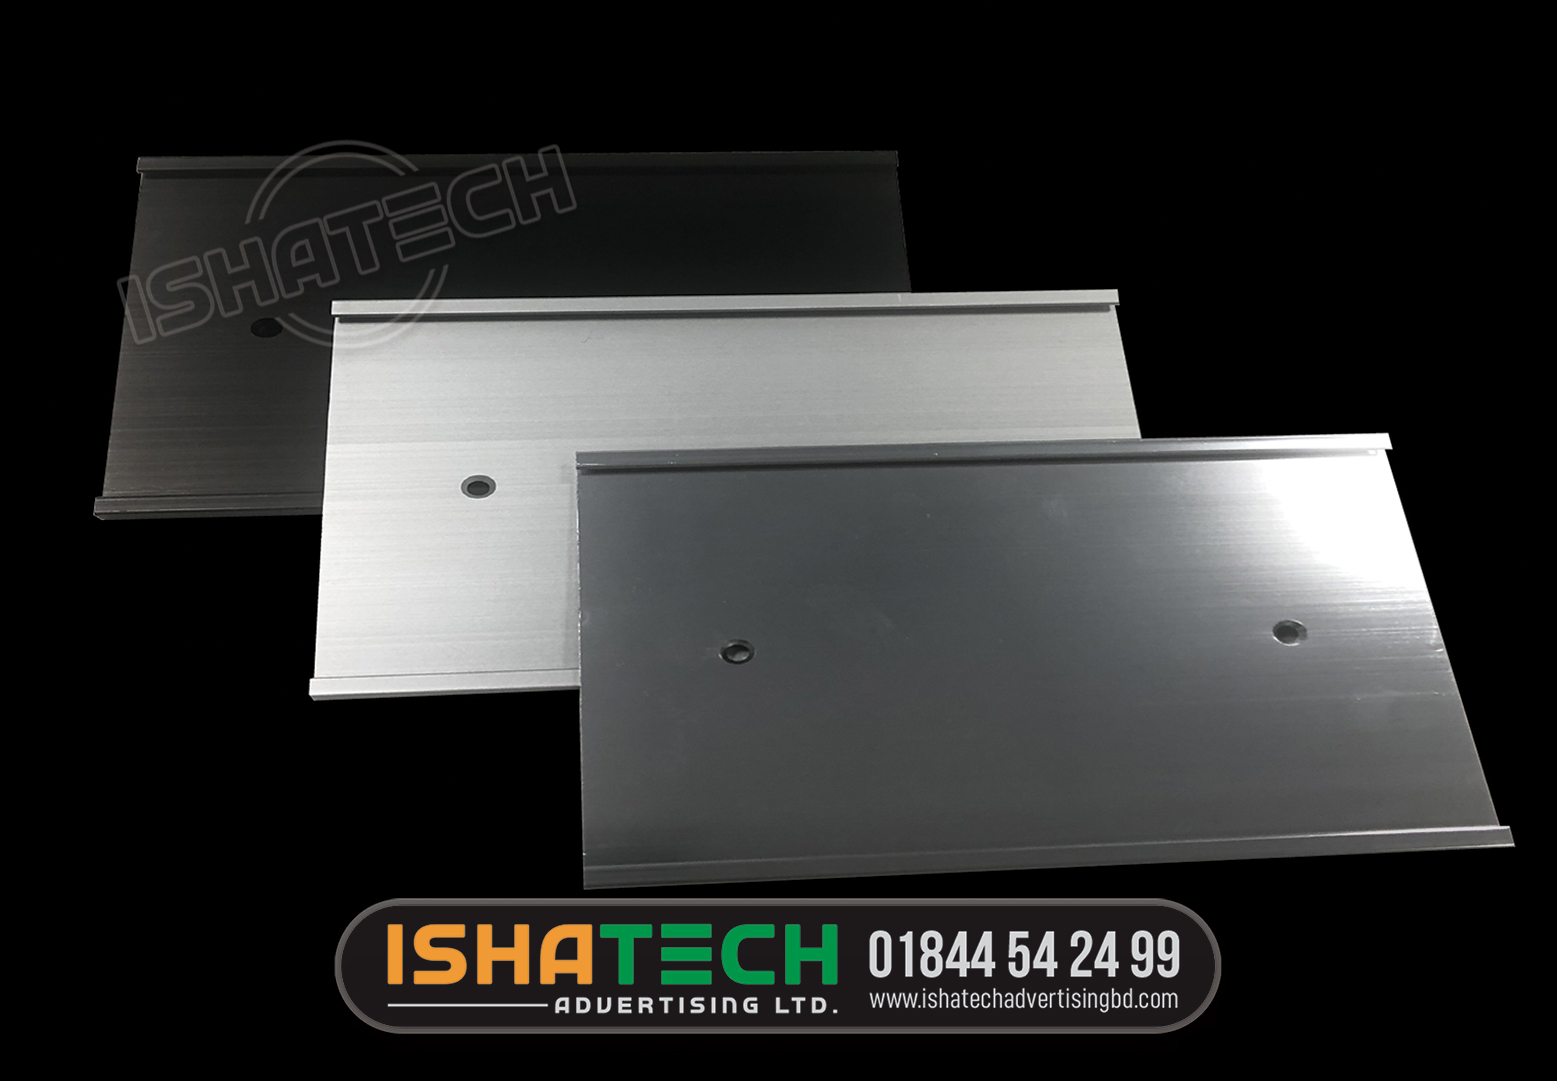 DOOR AND WALL NAME PLATE HOLDER SUPPLING BY ISHATECH ADVERTISING LTD